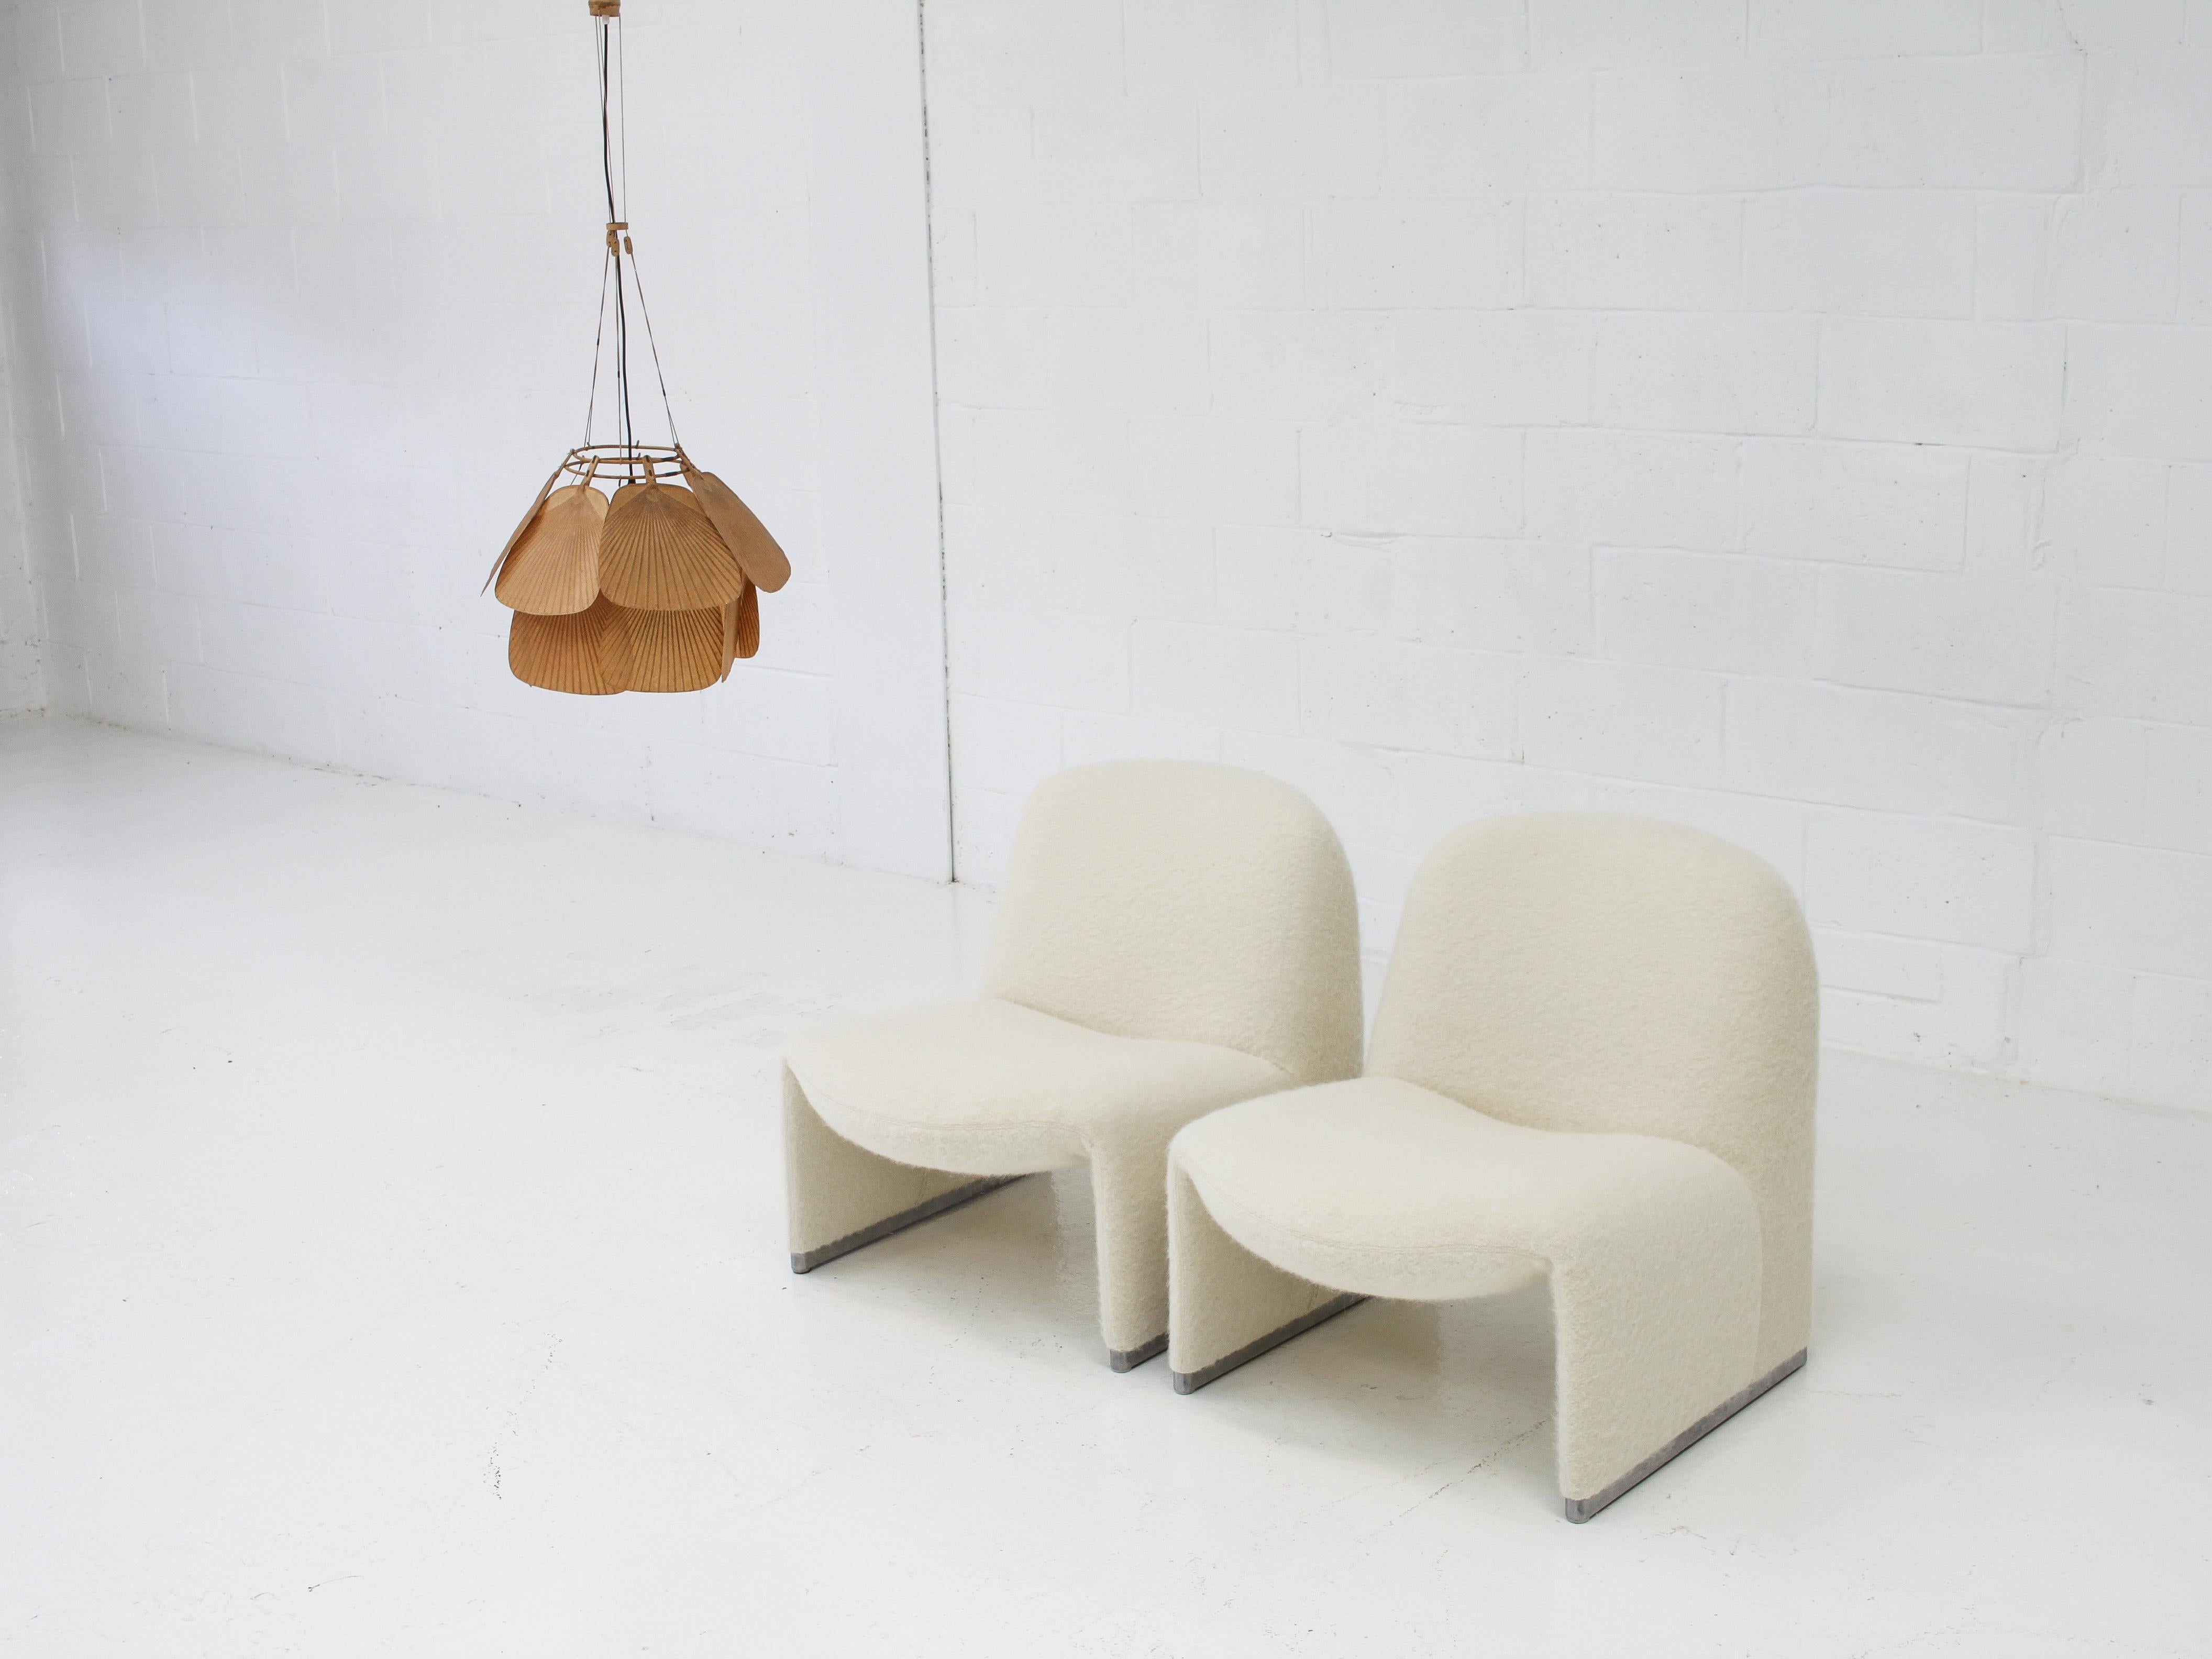 A pair of Giancarlo Piretti “Alky” chairs newly upholstered in fluffy wool, mohair and alpaca fabric which is produced by one of the most luxurious fabric manufacturers in the world, Pierre Frey.

Manufactured by Artifort in the 1970s.

The